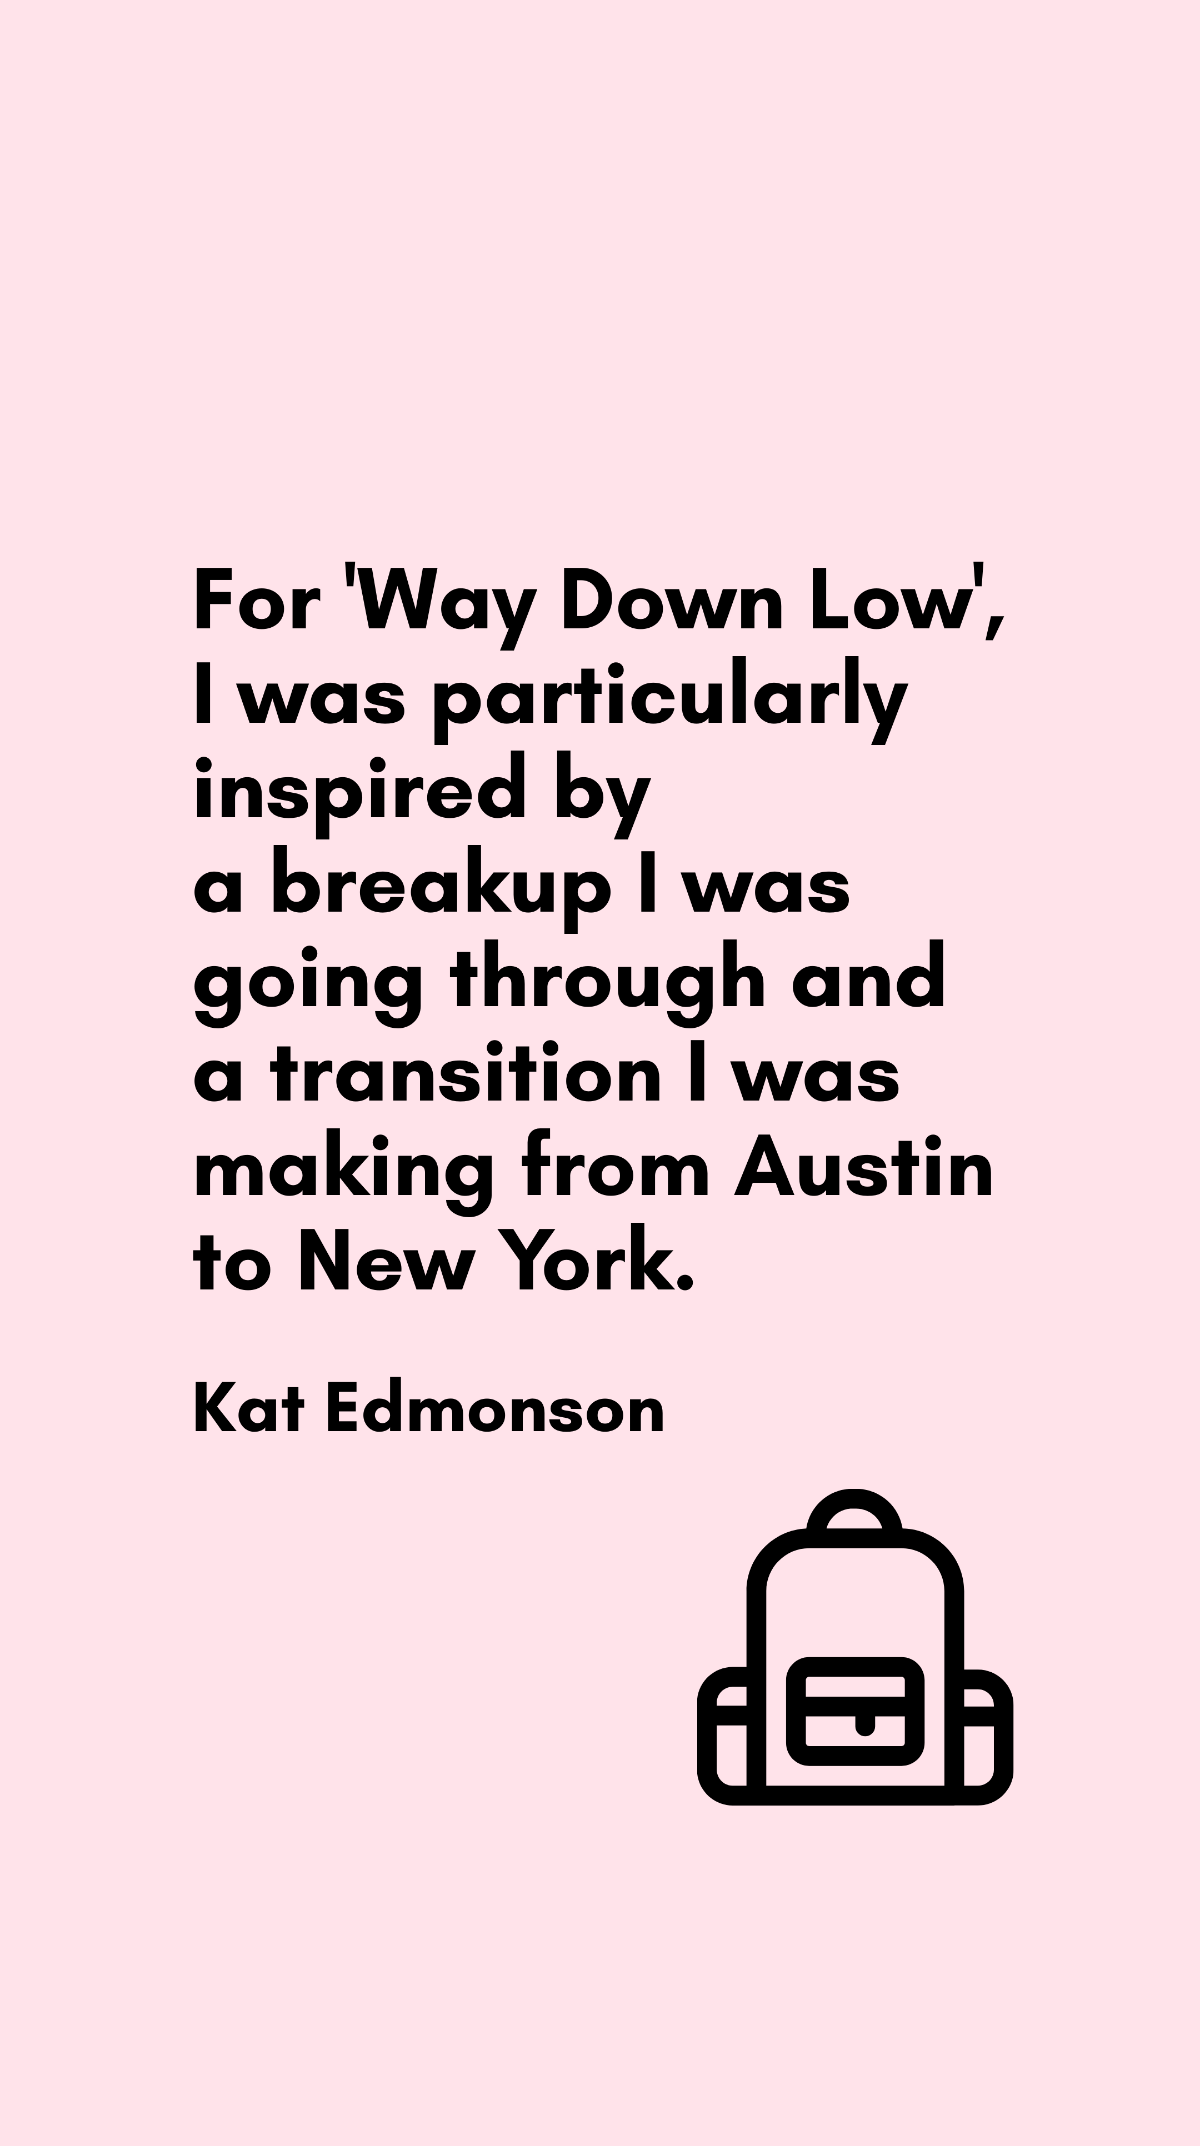 Kat Edmonson - For 'Way Down Low', I was particularly inspired by a breakup I was going through and a transition I was making from Austin to New York. Template